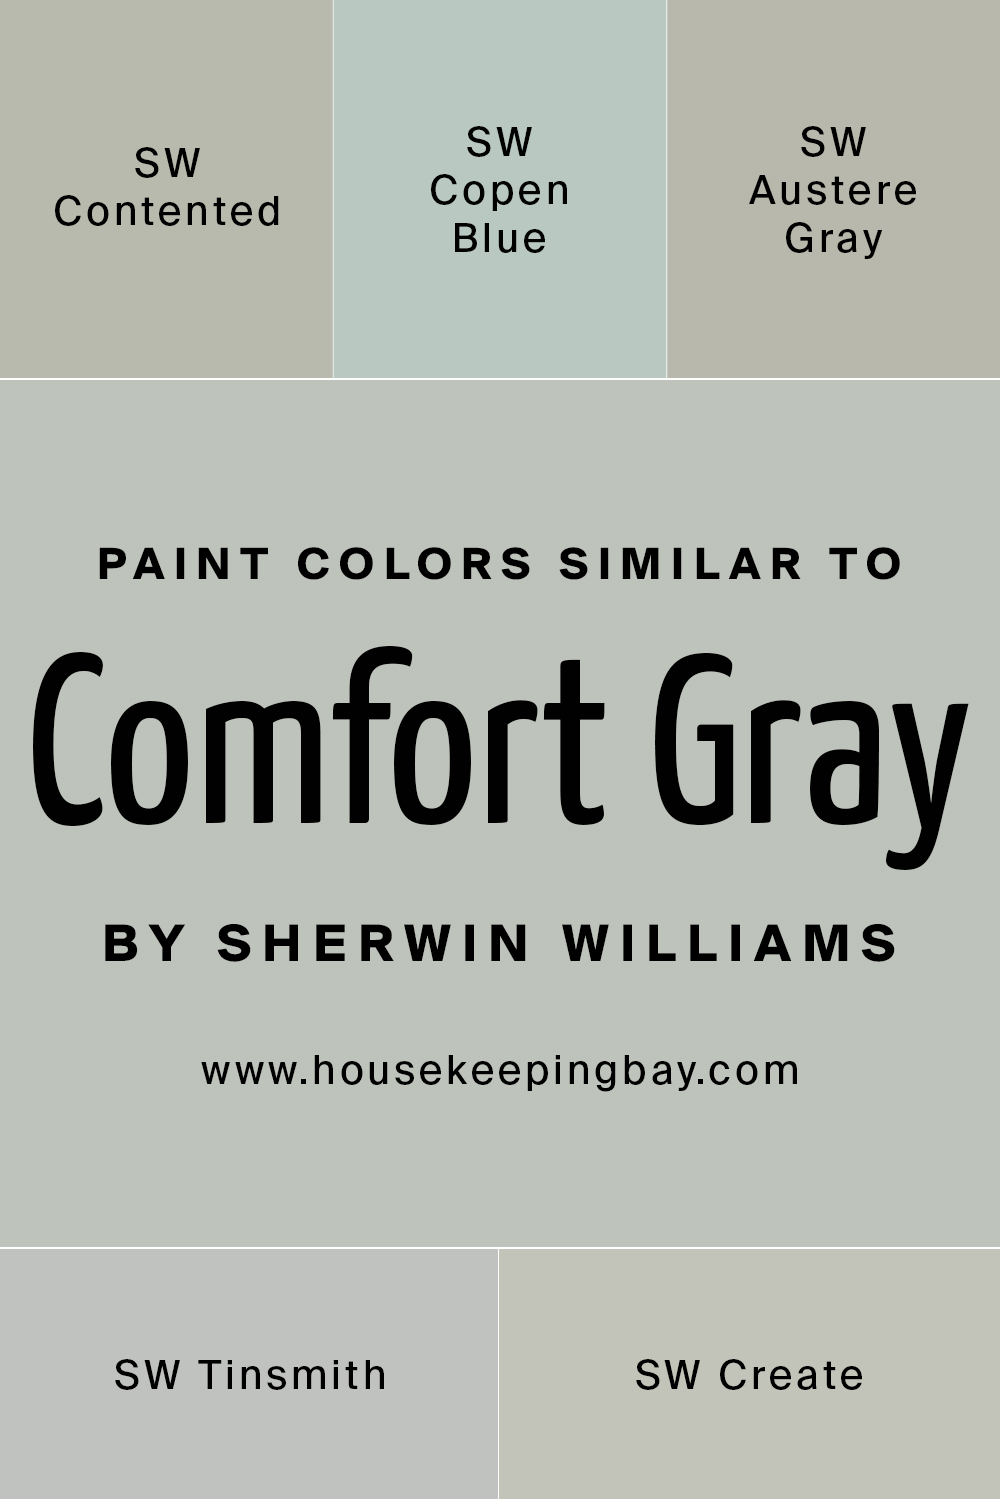 Paint Colors Similar to Comfort Gray by Sherwin Williams